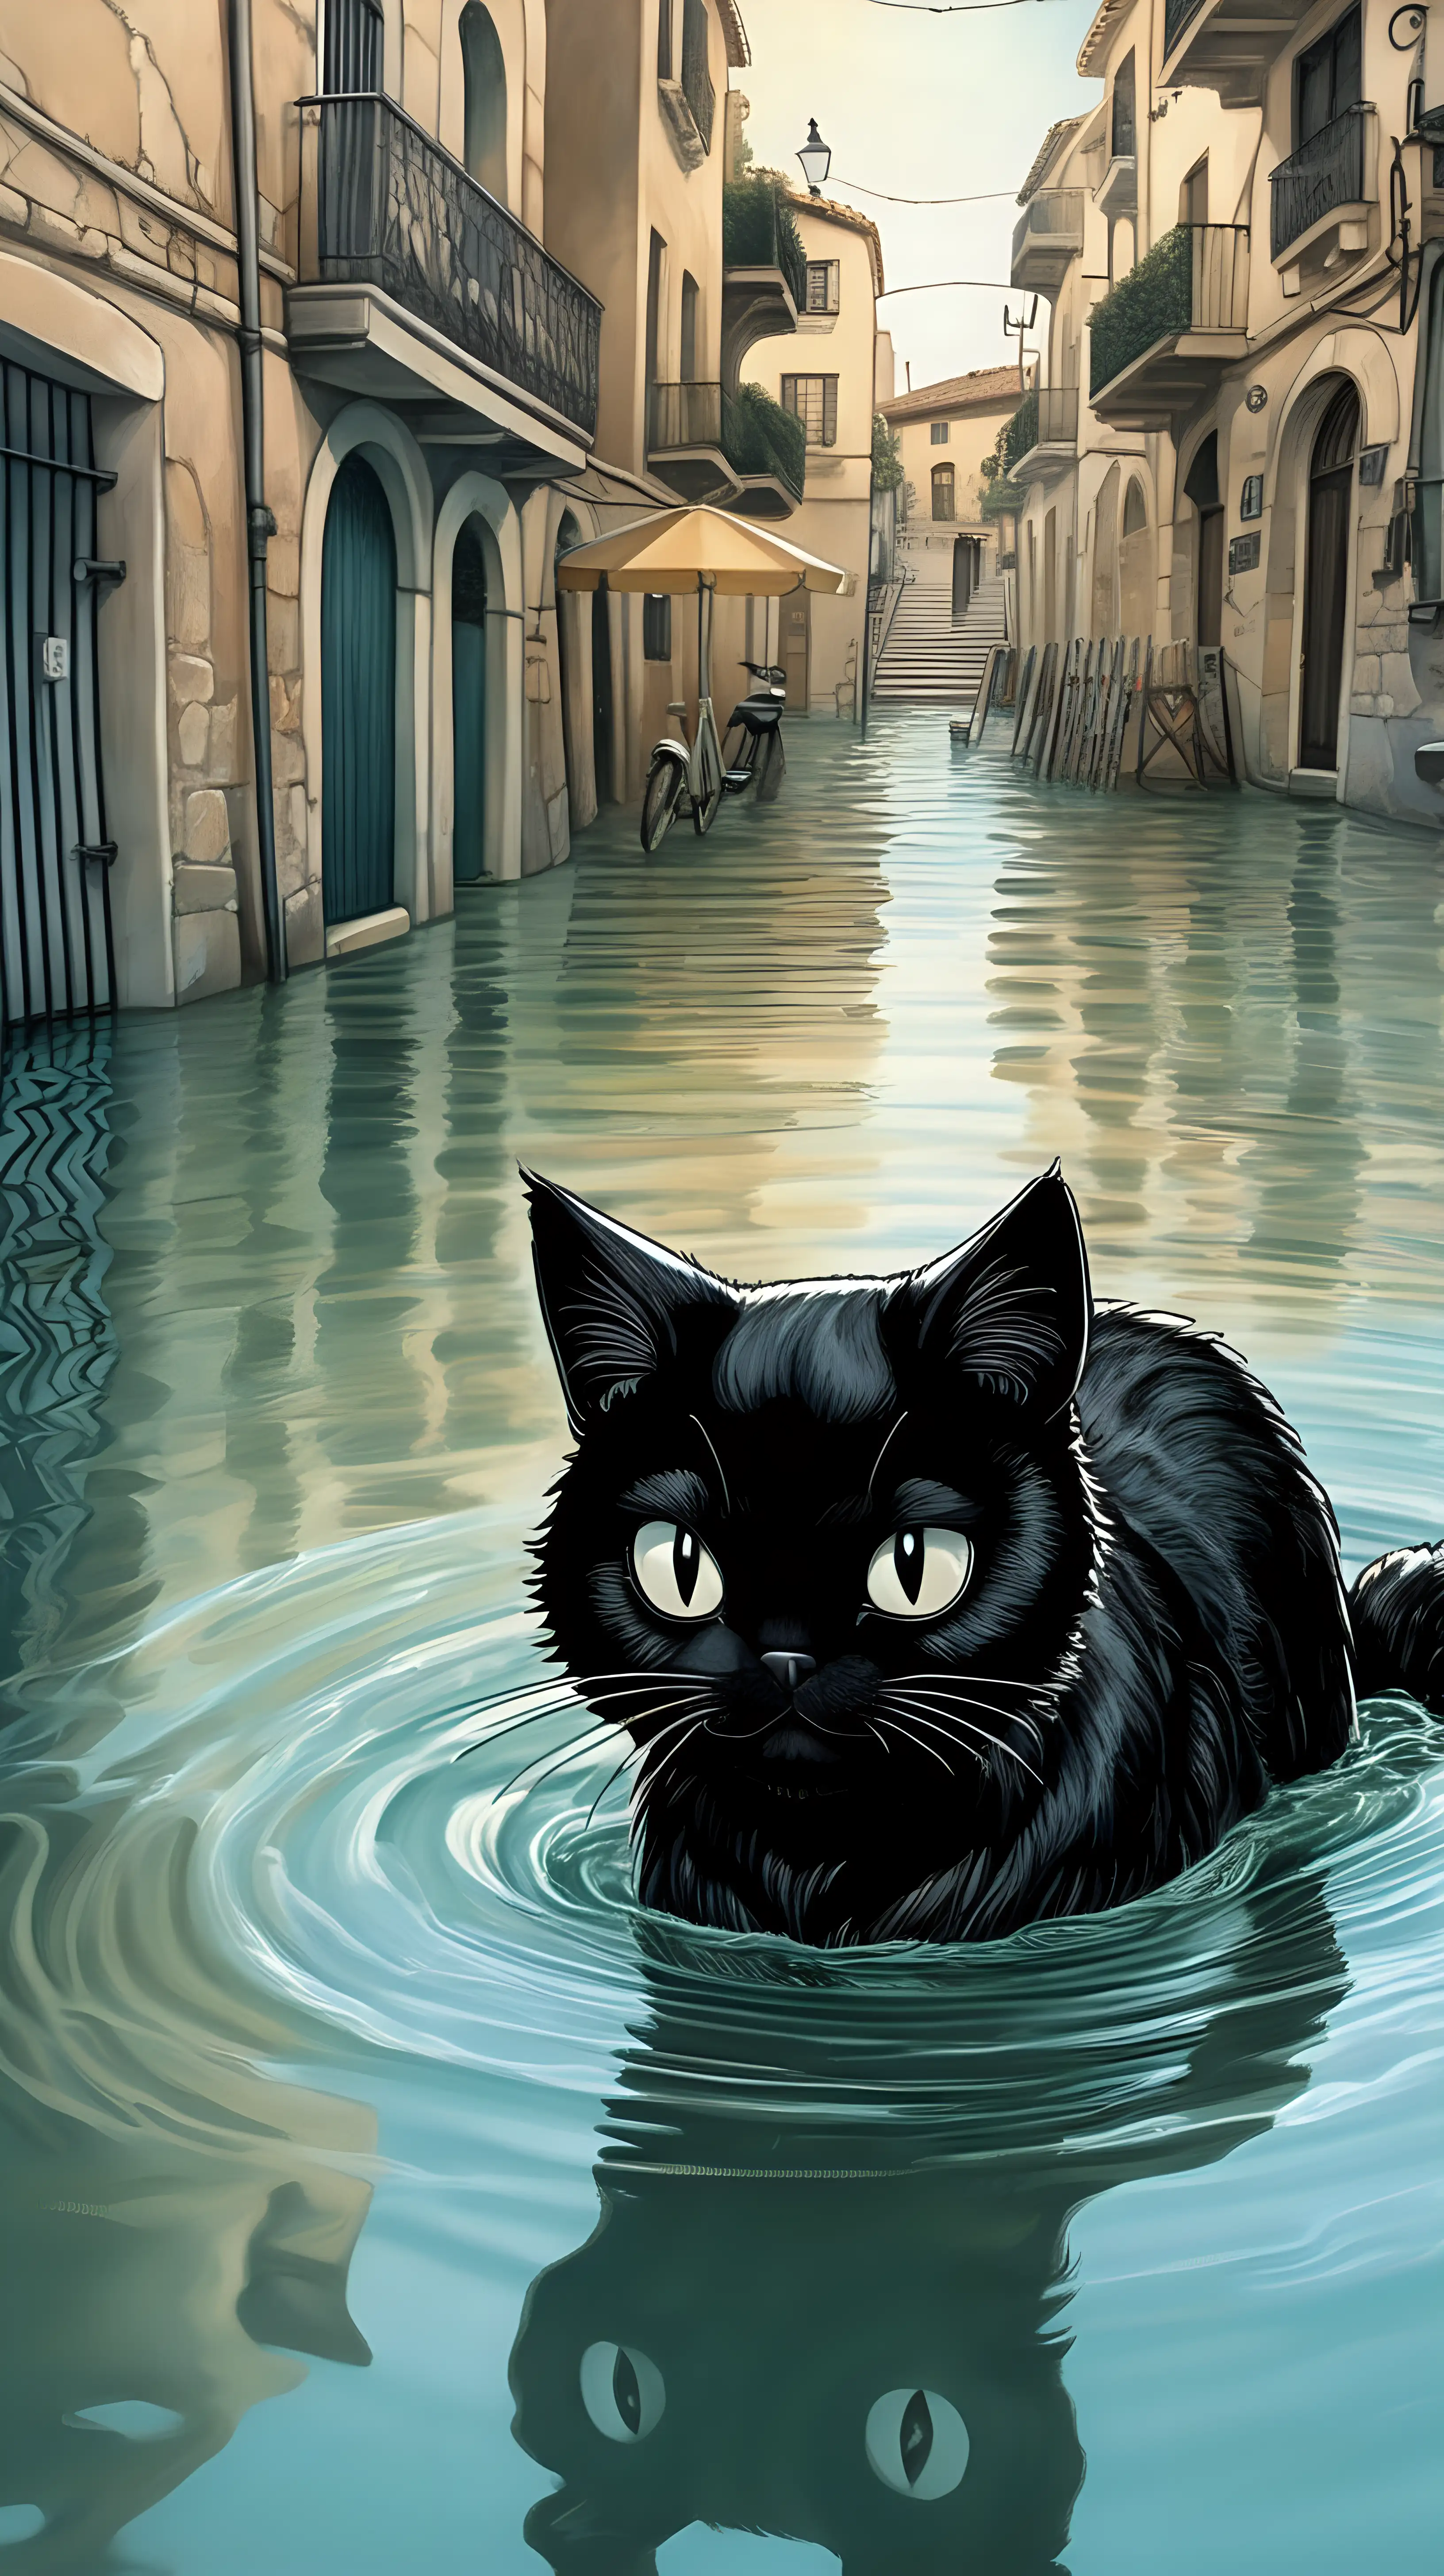 Resilient Black Cat Swimming in Flooded Spanish City Comic Book Style